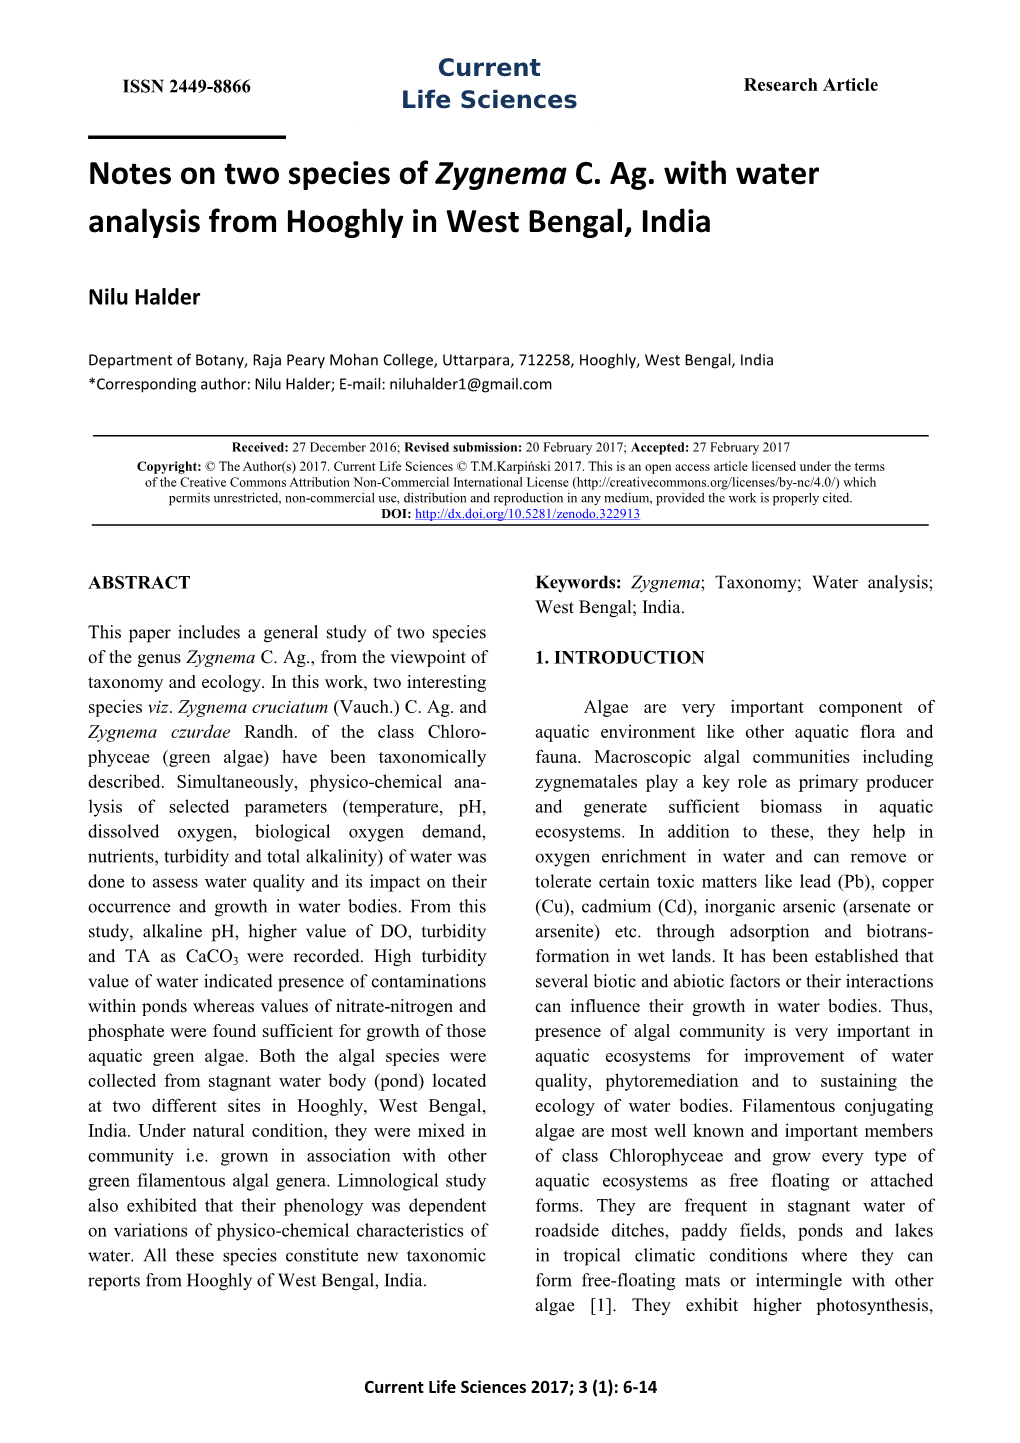 Notes on Two Species of Zygnema C. Ag. with Water Analysis from Hooghly in West Bengal, India